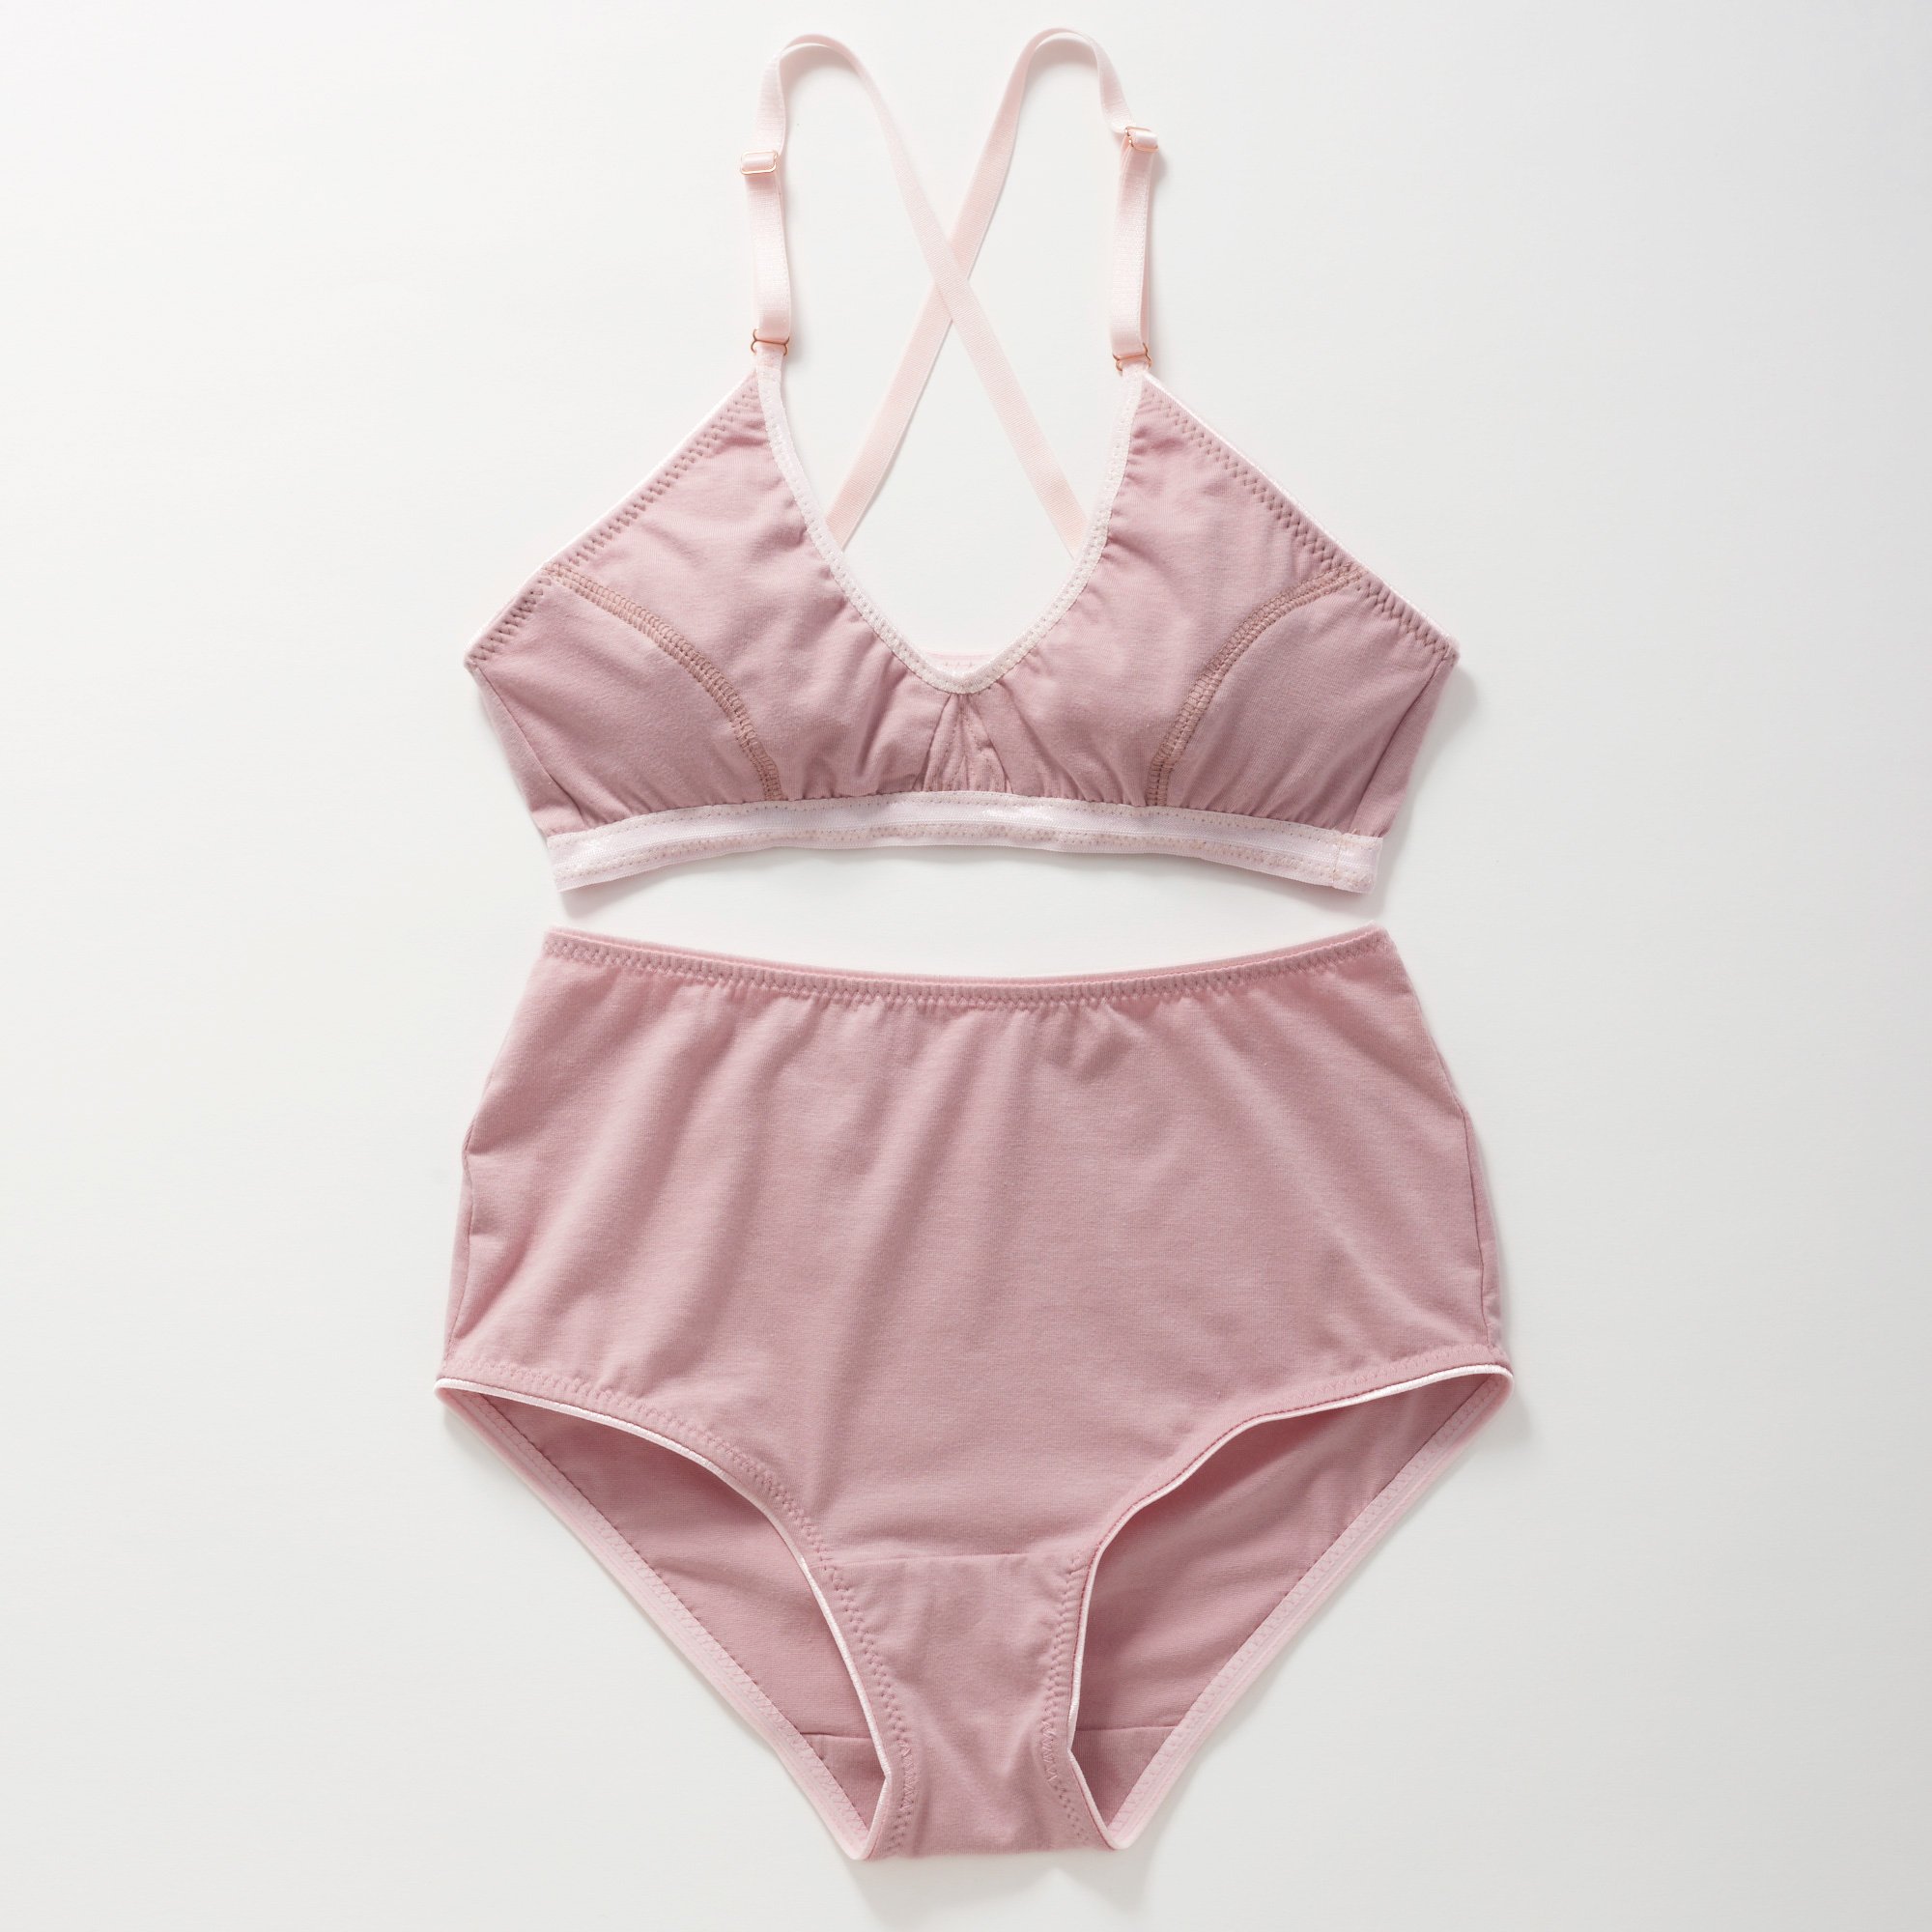 3 Reasons to Choose Brook There for Organic Underwear & Bras